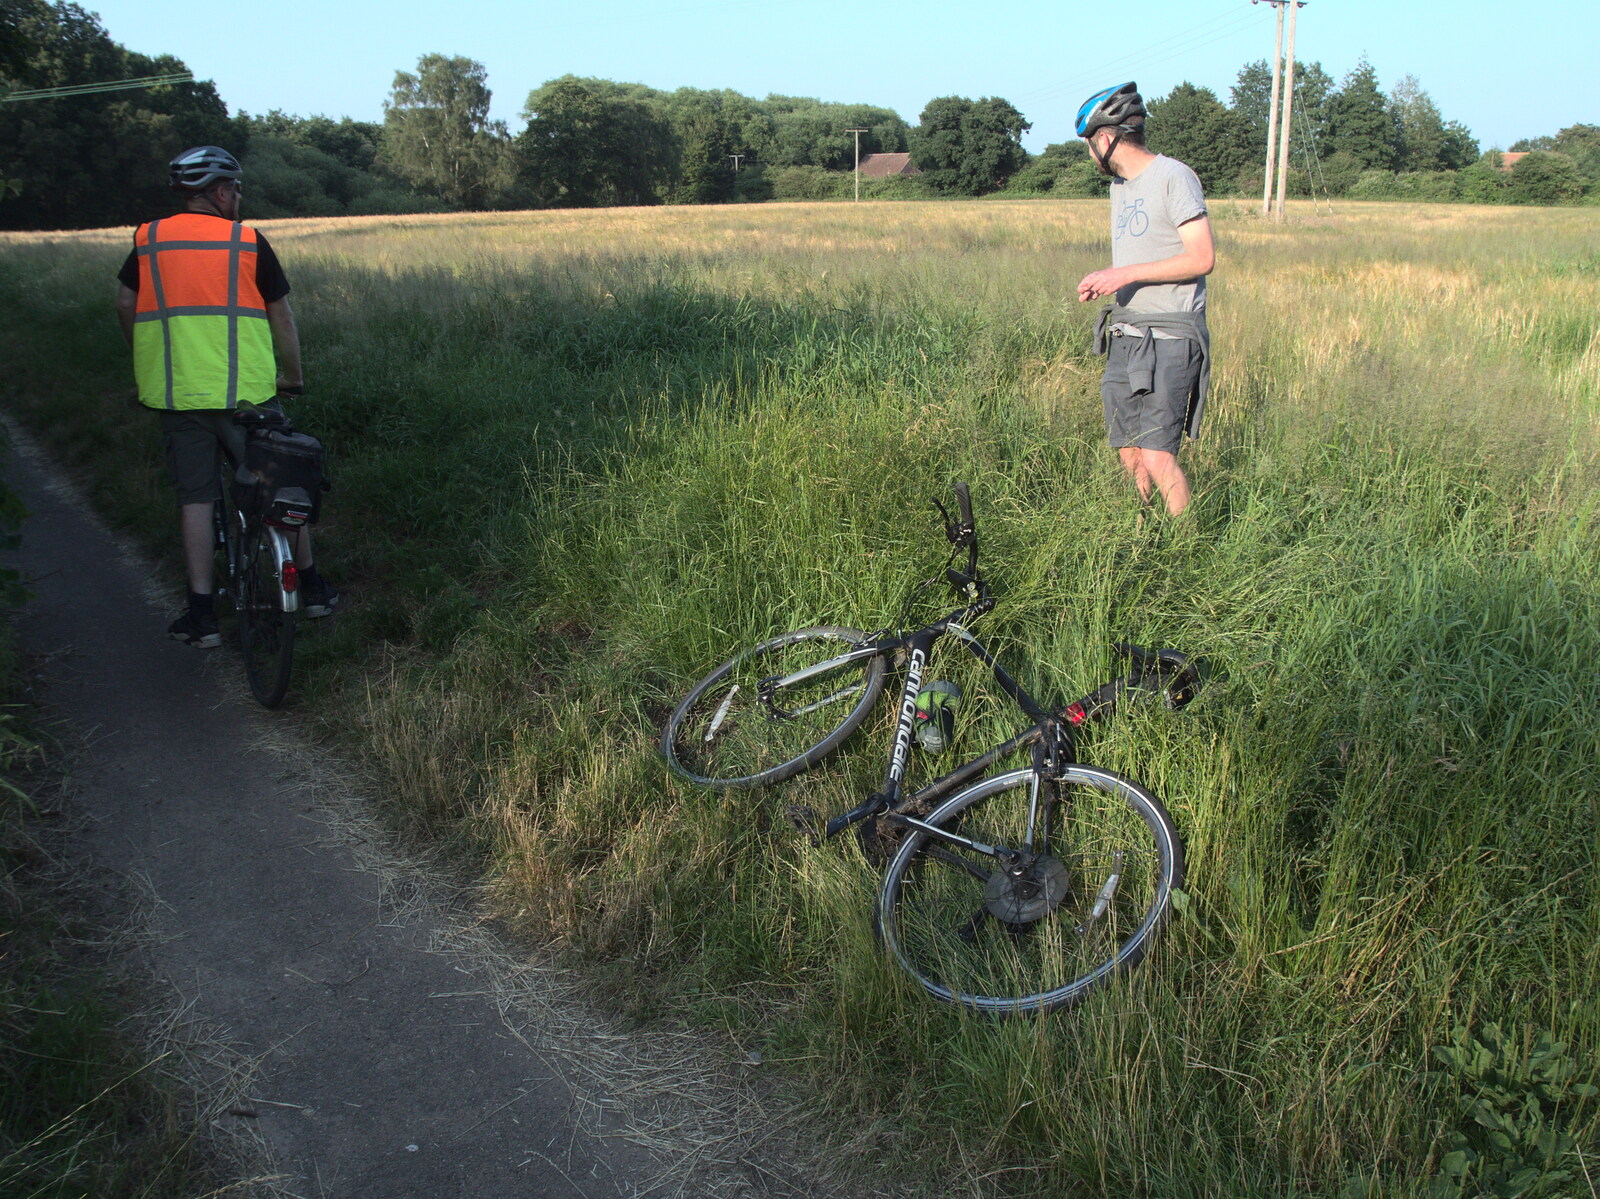 The Boy Phil's bike has been abandoned from The BSCC at The Crown, Gissing, Norfolk - 22nd July 2021